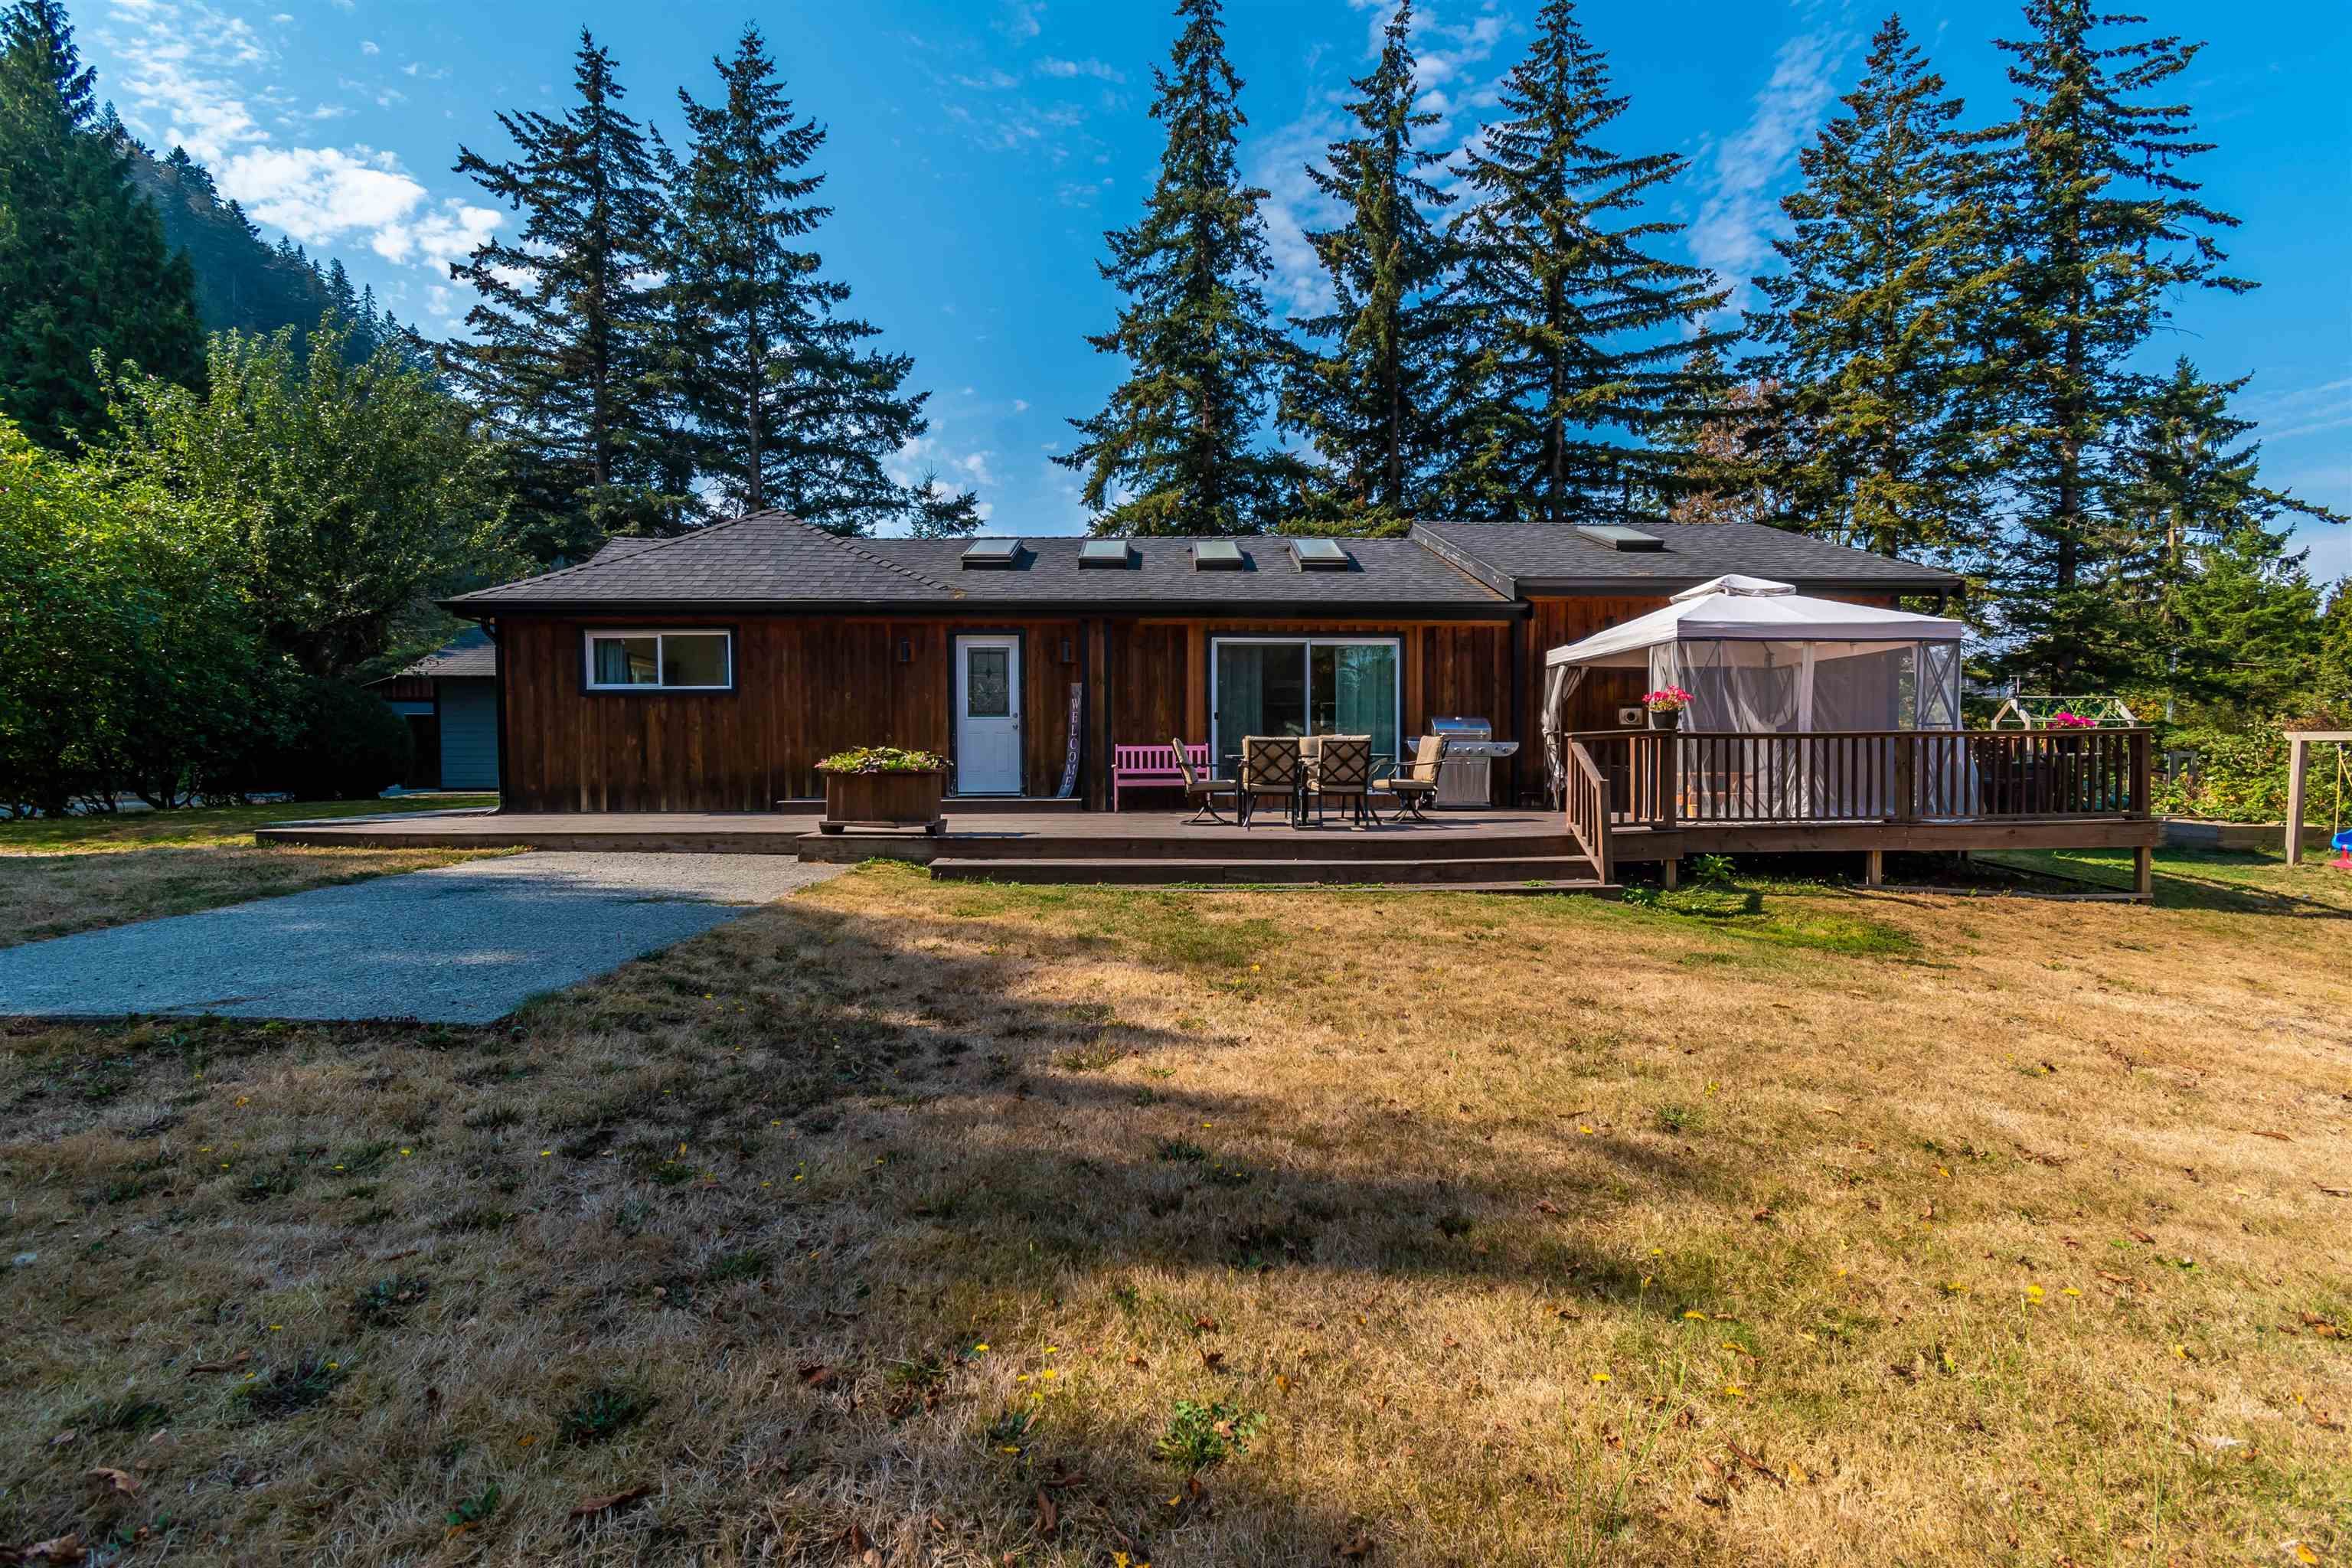 I have sold a property at 44375 VEDDER MOUNTAIN RD in Yarrow
